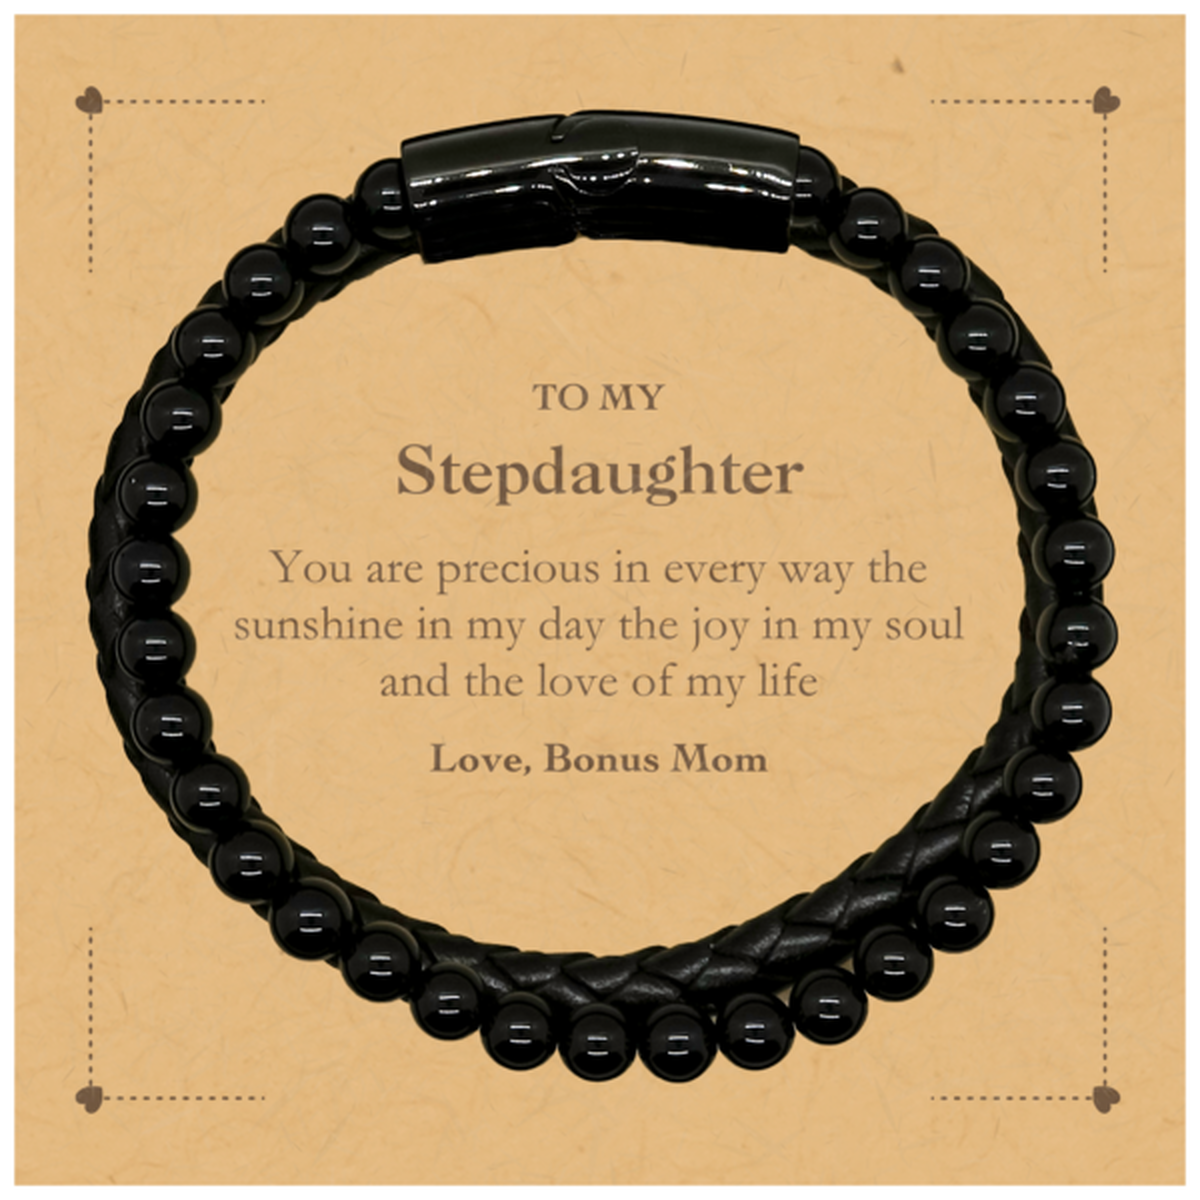 Graduation Gifts for Stepdaughter Stone Leather Bracelets Present from Bonus Mom, Christmas Stepdaughter Birthday Gifts Stepdaughter You are precious in every way the sunshine in my day. Love, Bonus Mom